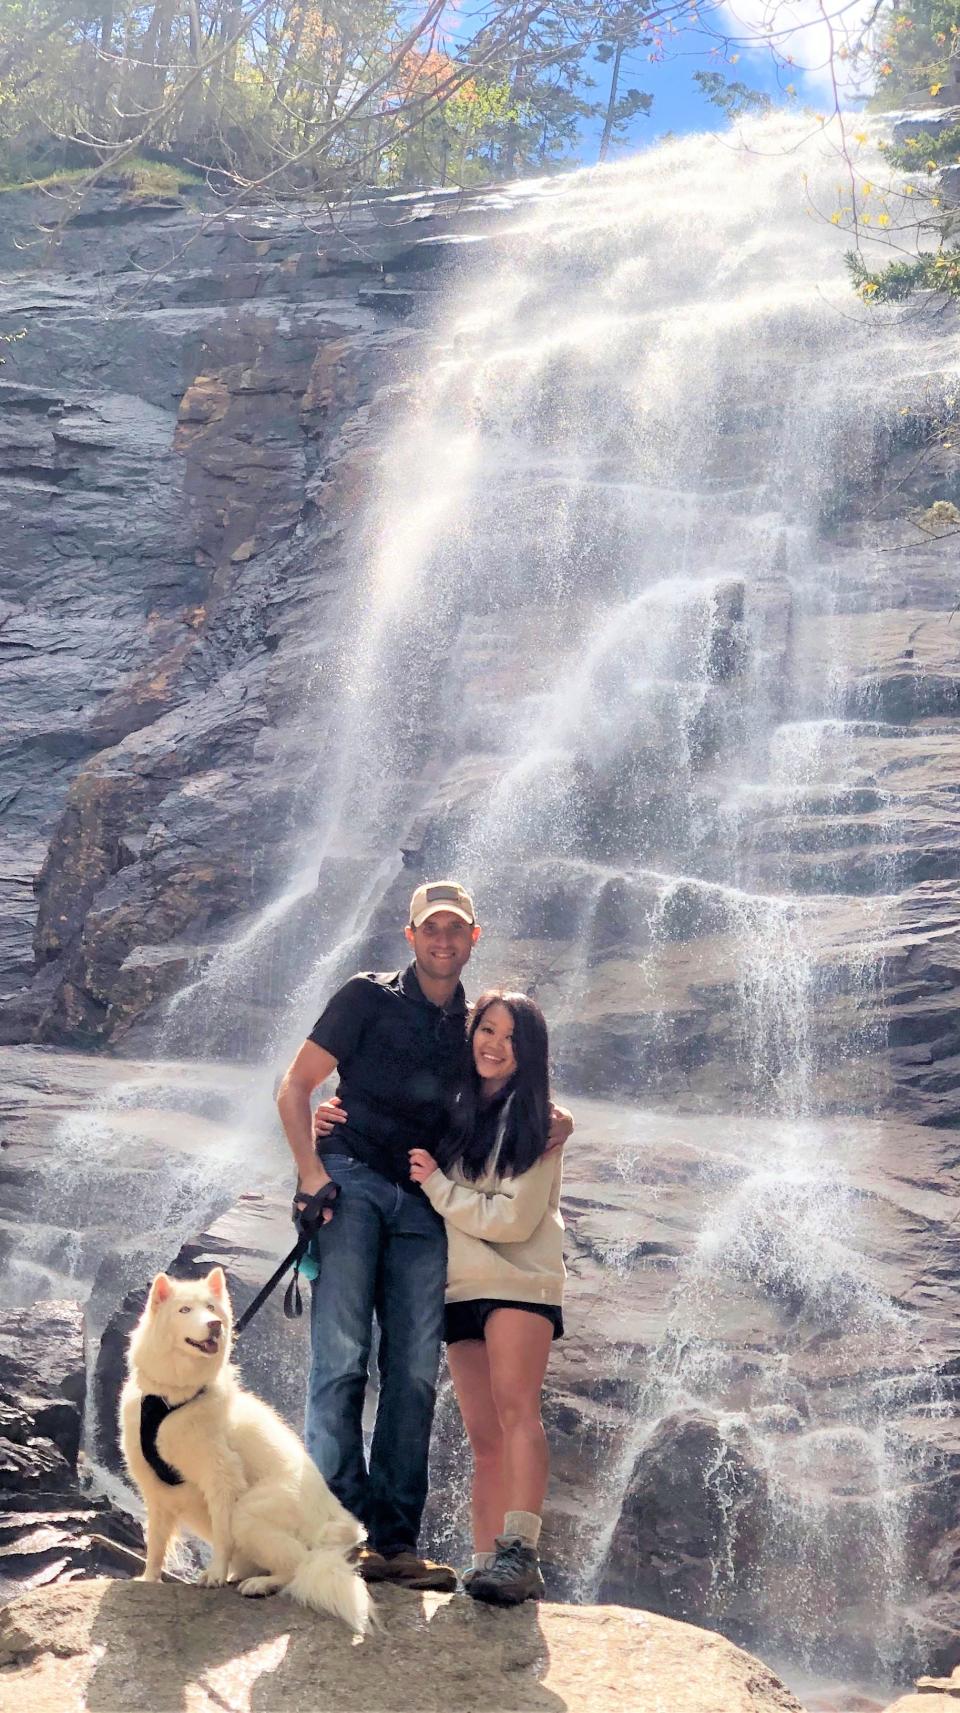 Sam Rouabhia, Victoria Lee and Luna, the Siberian husky, on a hike in New England stop by a waterfall.